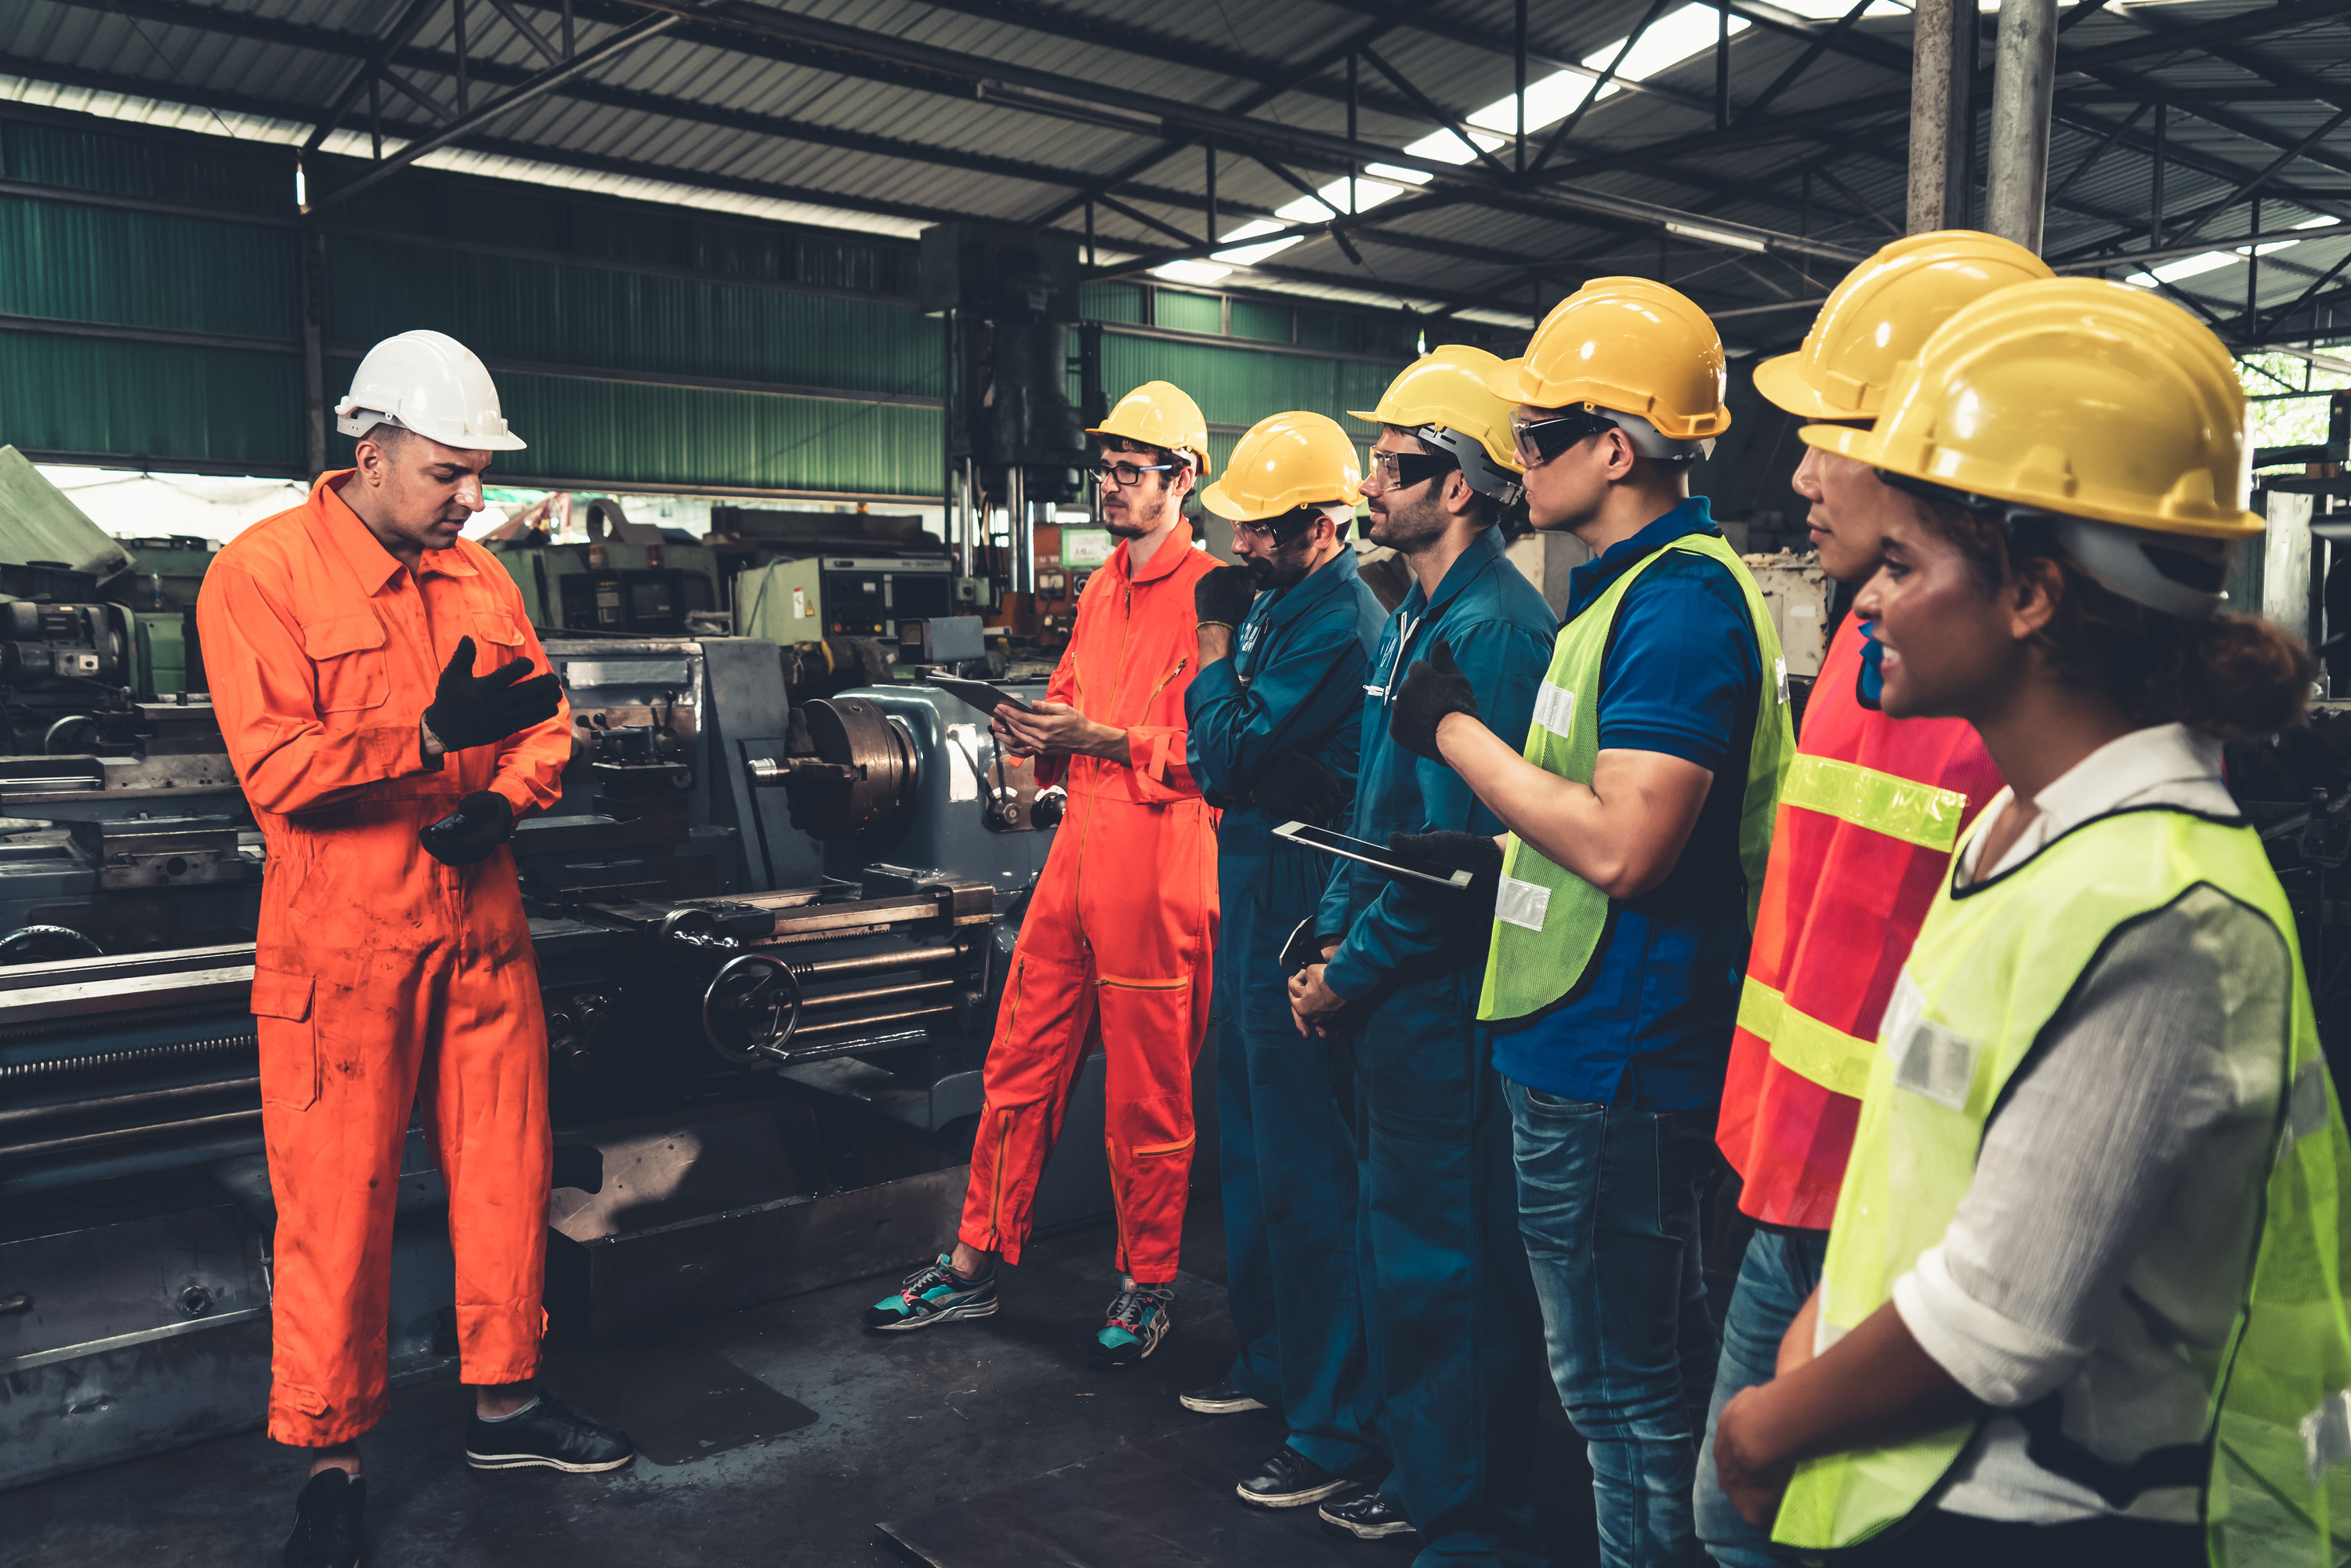 People wearing hard hats stand in a warehouse and listen to a person also wearing a hard hat